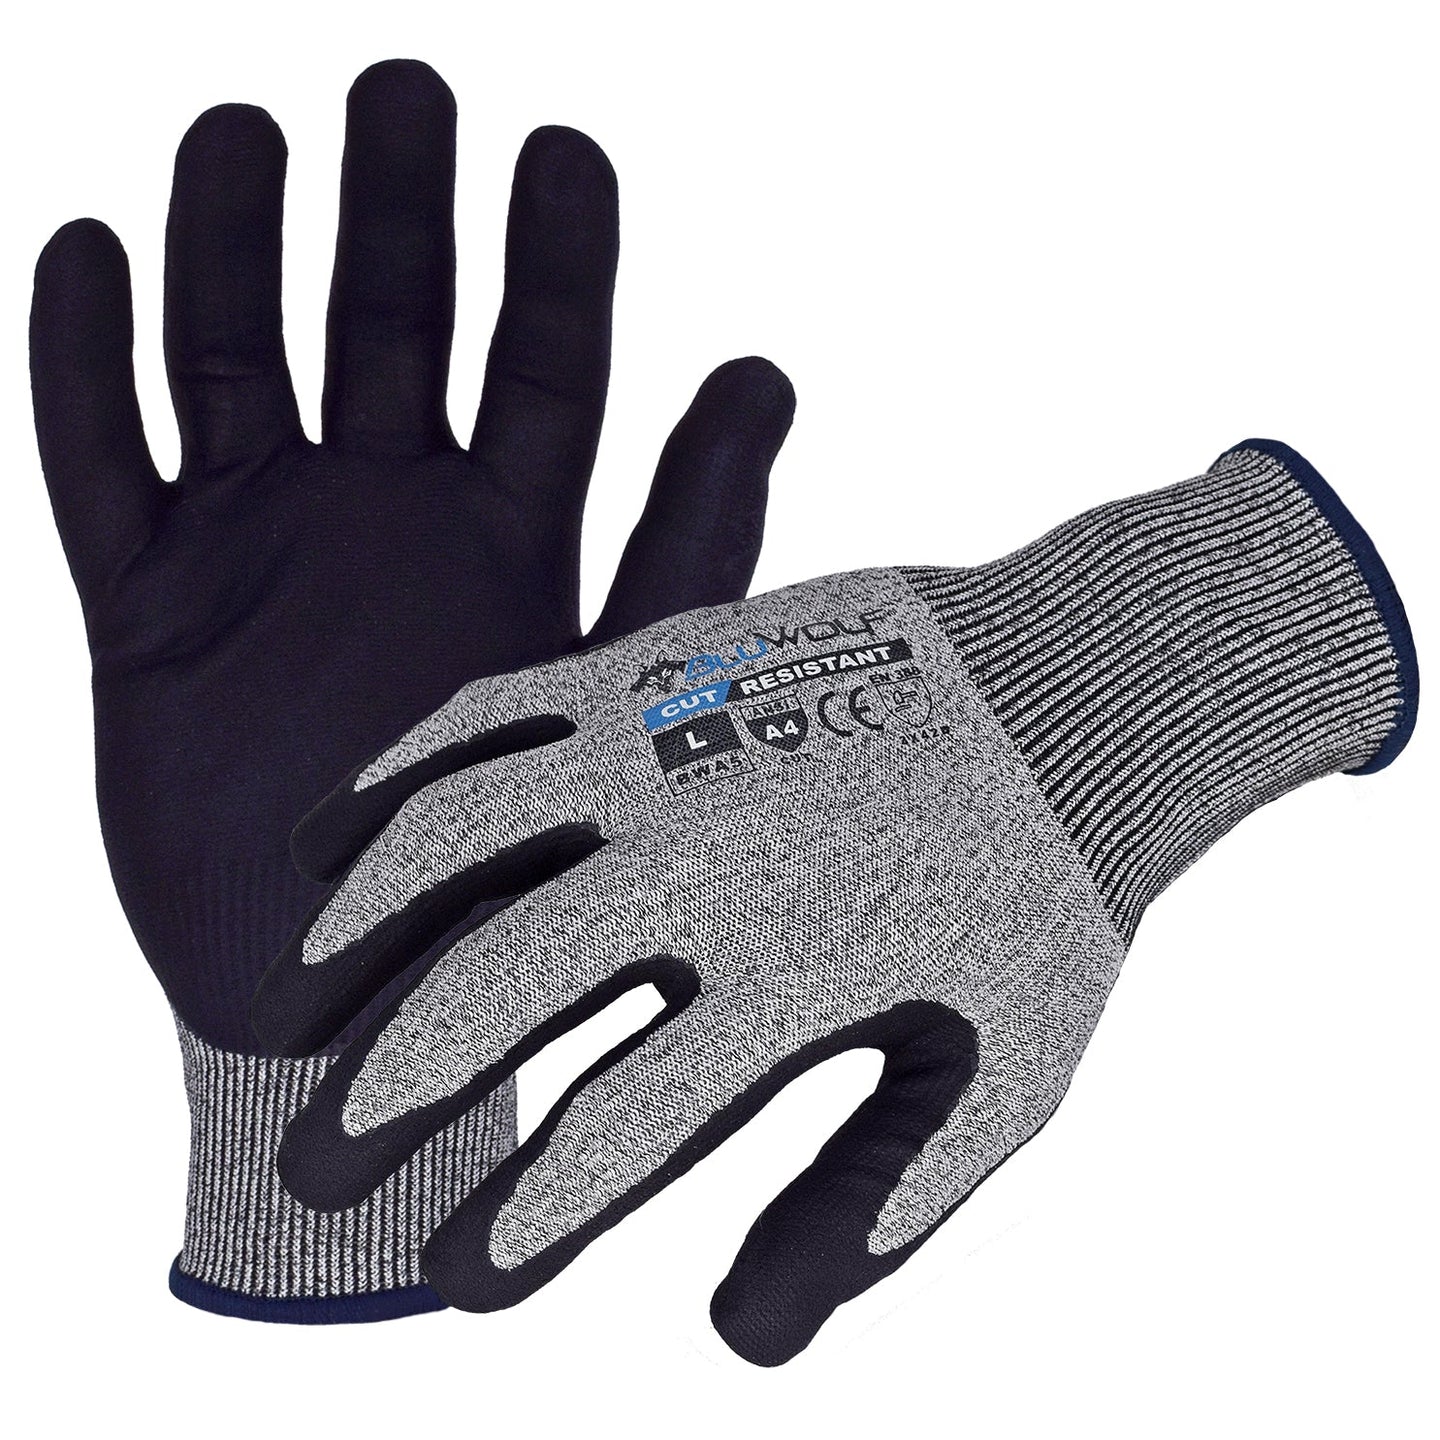 BluWolf(BW4040) Cut Resistant Work Gloves, 18-Gauge Gray Seamless ANSI A4 Cut Resistant Gloves w/ Black Ultra-Thin Micro-Foam Nitrile/Polyurethane Palm/Finger Coating, X-Large, Case of 12 Pairs